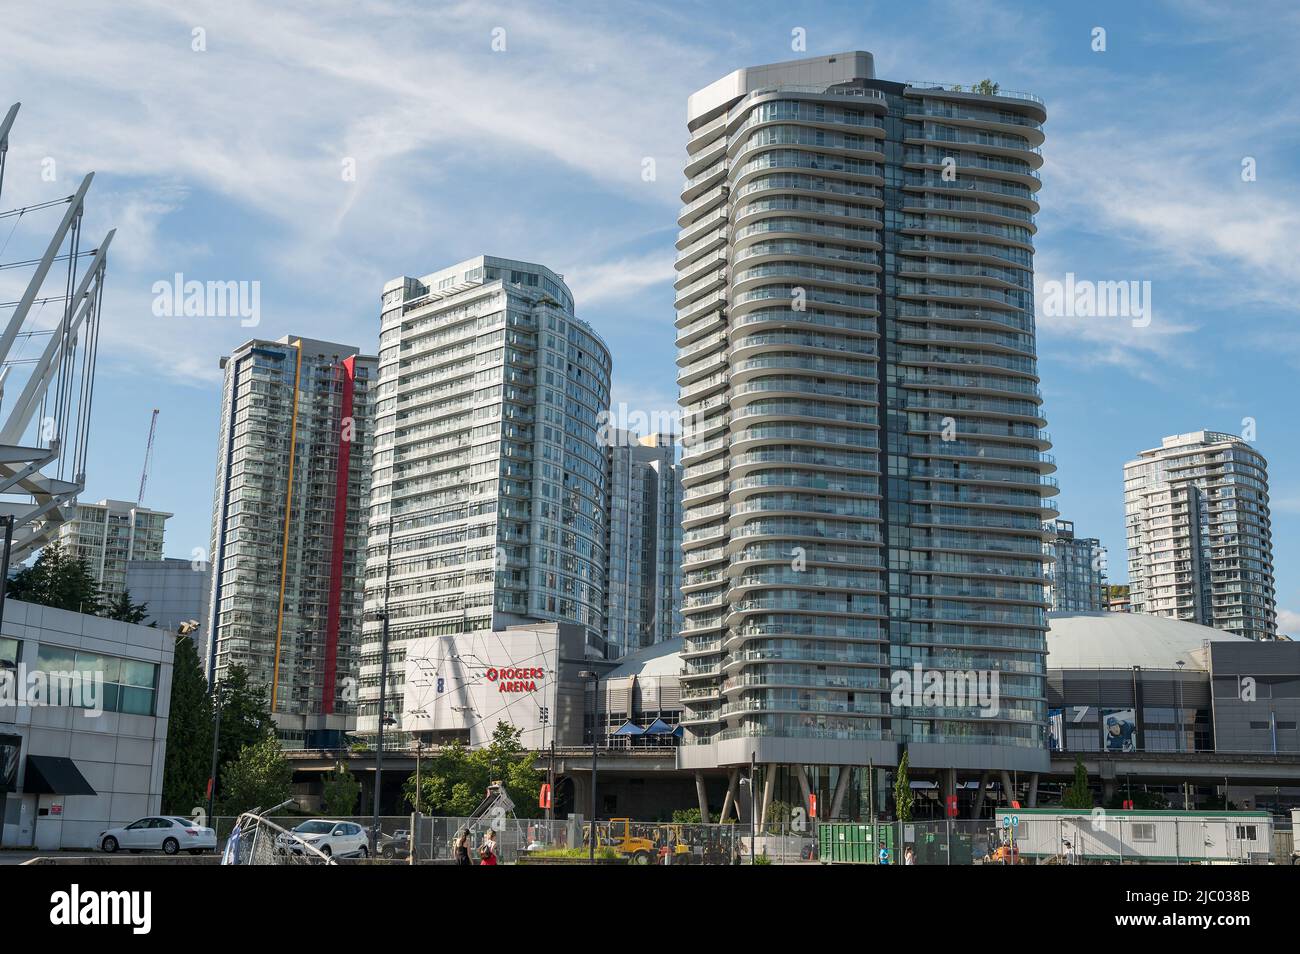 The downtown Vancouver skyline with the Yaletown towers and Rogers Arena.  Vancouver BC, Canada. Stock Photo